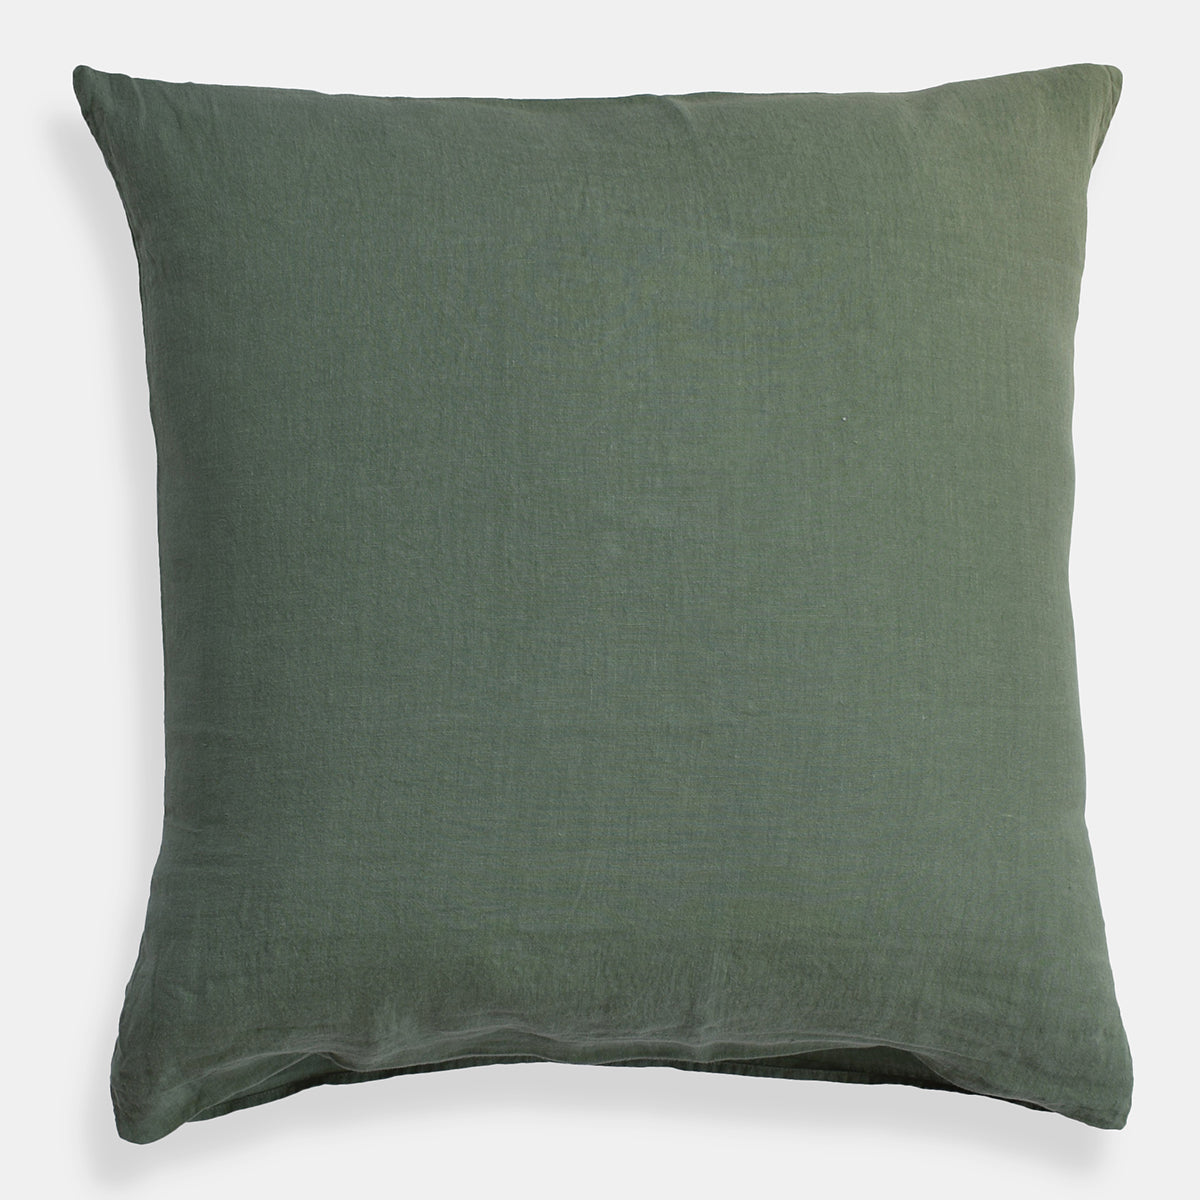 Linge Particulier Jade Green Euro Linen Pillowcase Sham for a colorful linen bedding look in camo green - Collyer&#39;s Mansion